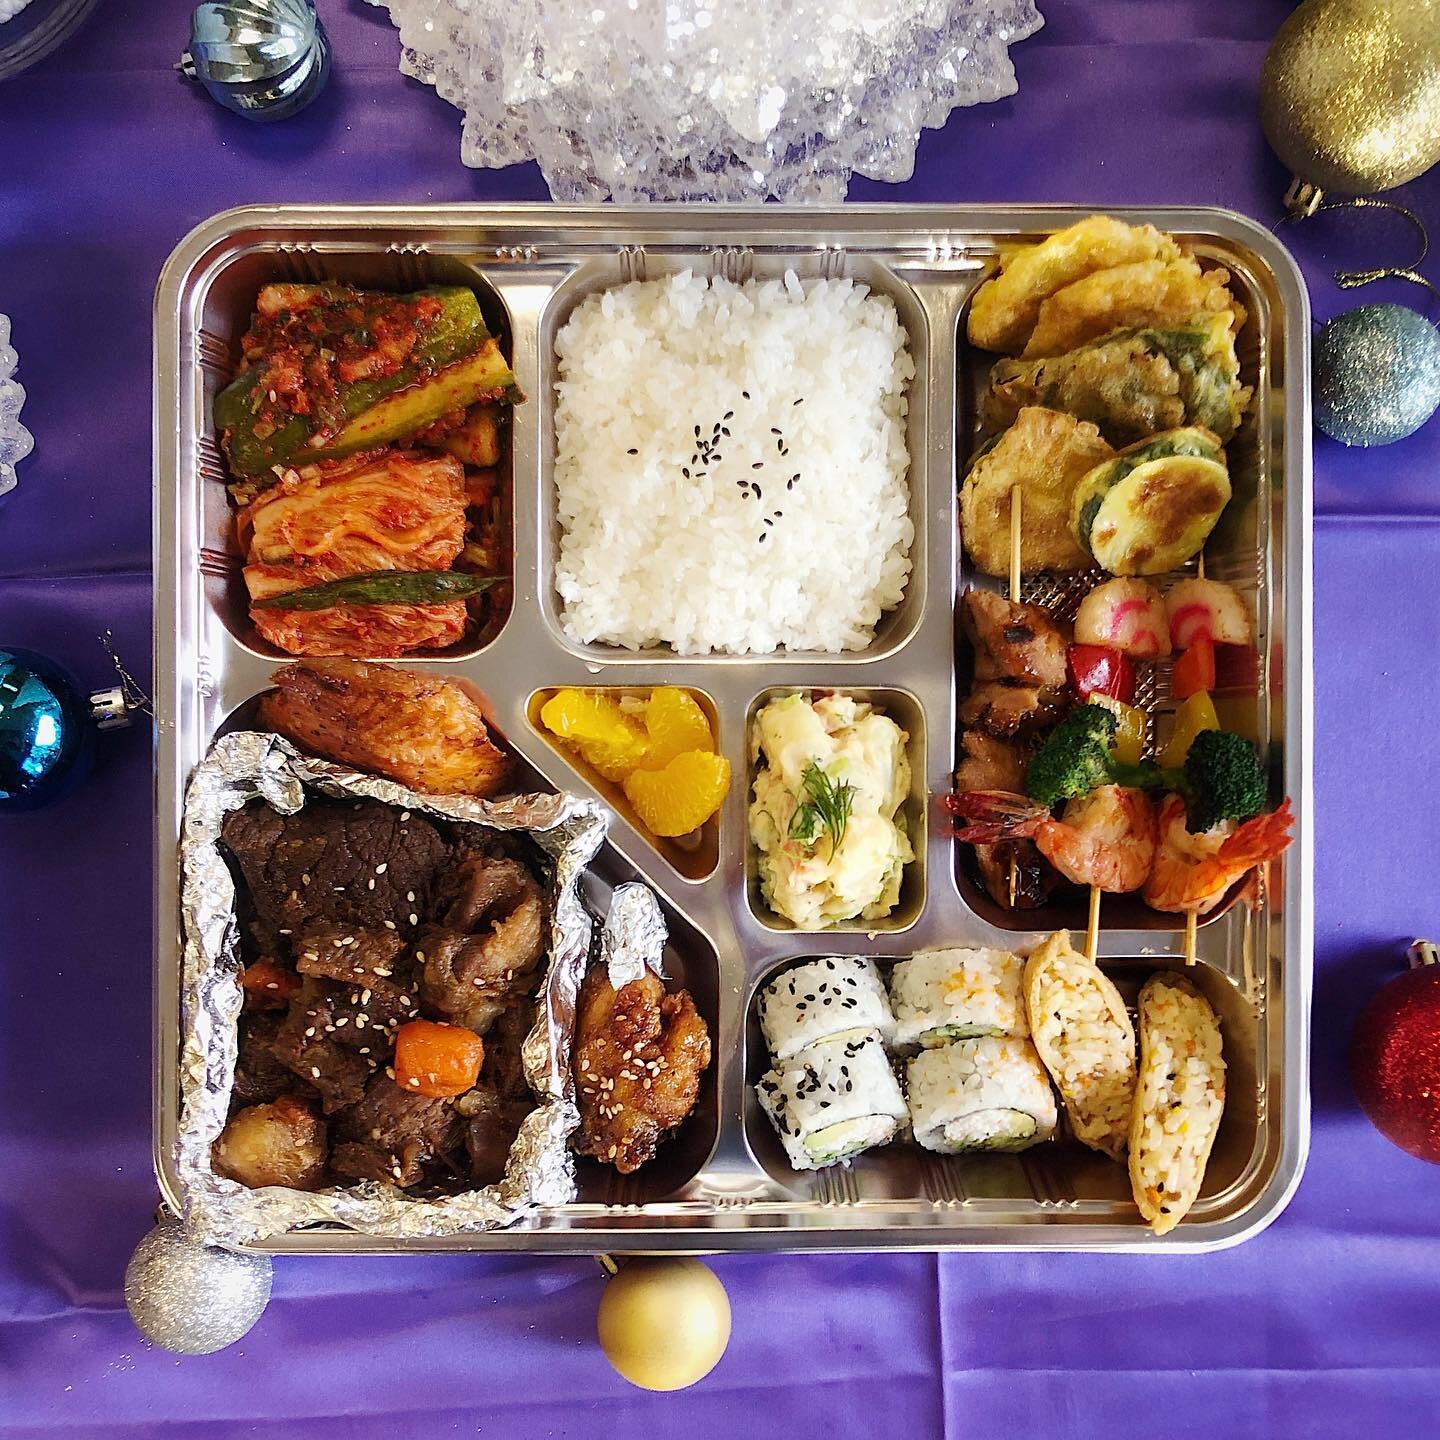 We wanted to let you all know that we are currently offering our &ldquo;doshirak&rdquo; take-out with a 10 person minimum order! Give us a call to schedule an order with us this holiday season!
#korean #koreanfood #koreancuisine #takeout #bento #dosh